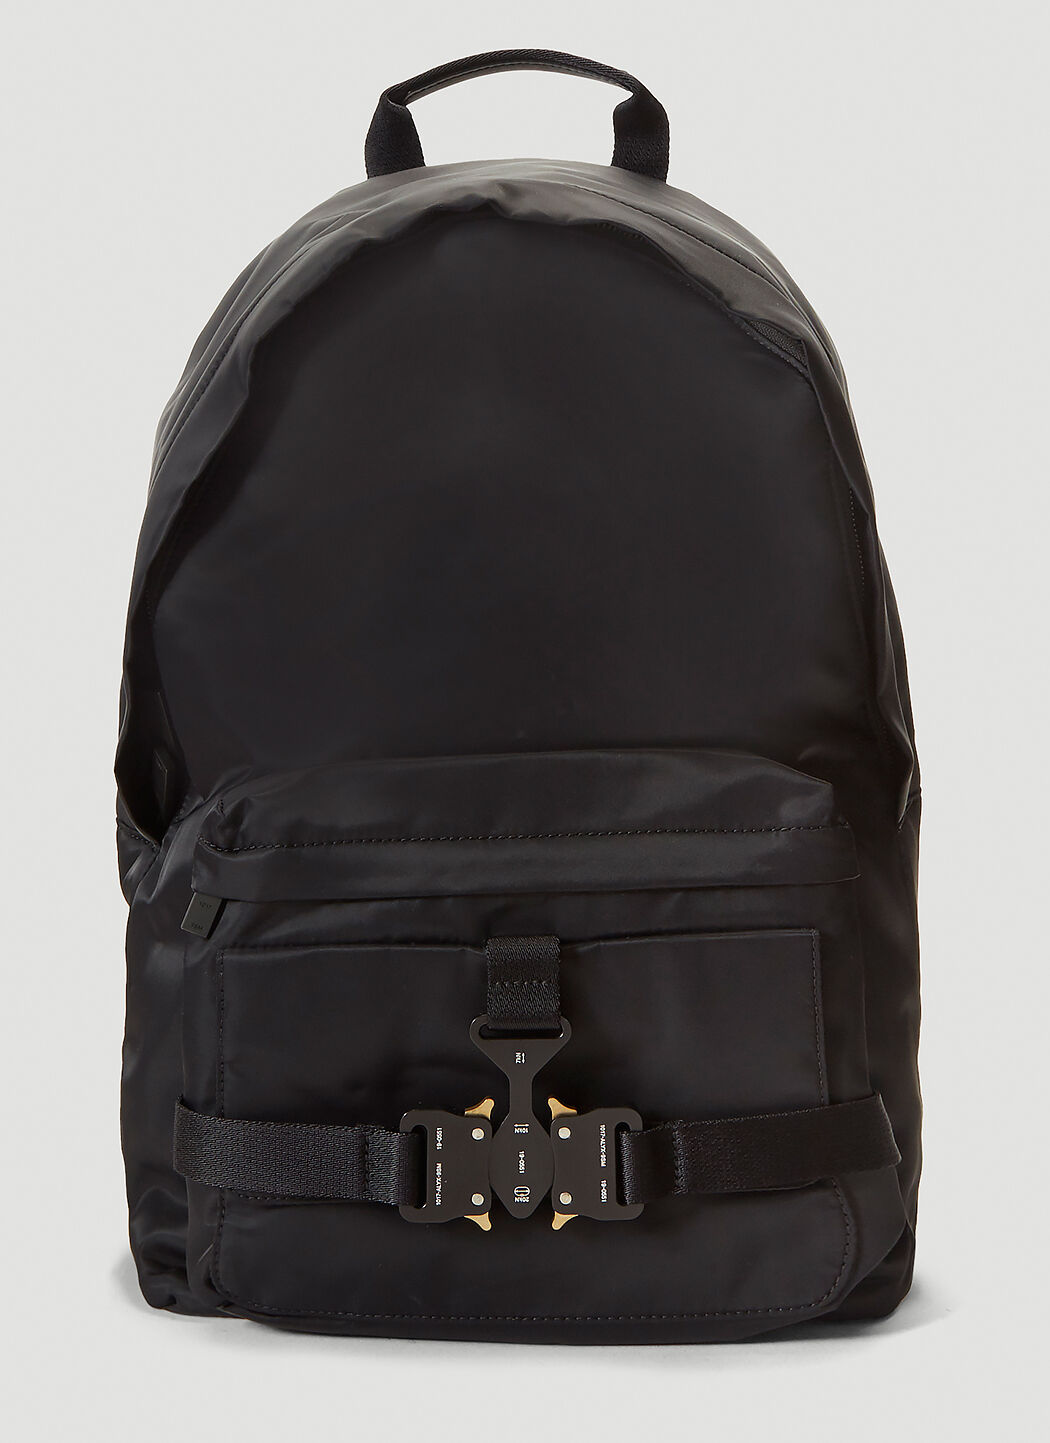 1017 ALYX 9SM Tricon Backpack グレー aly0152002